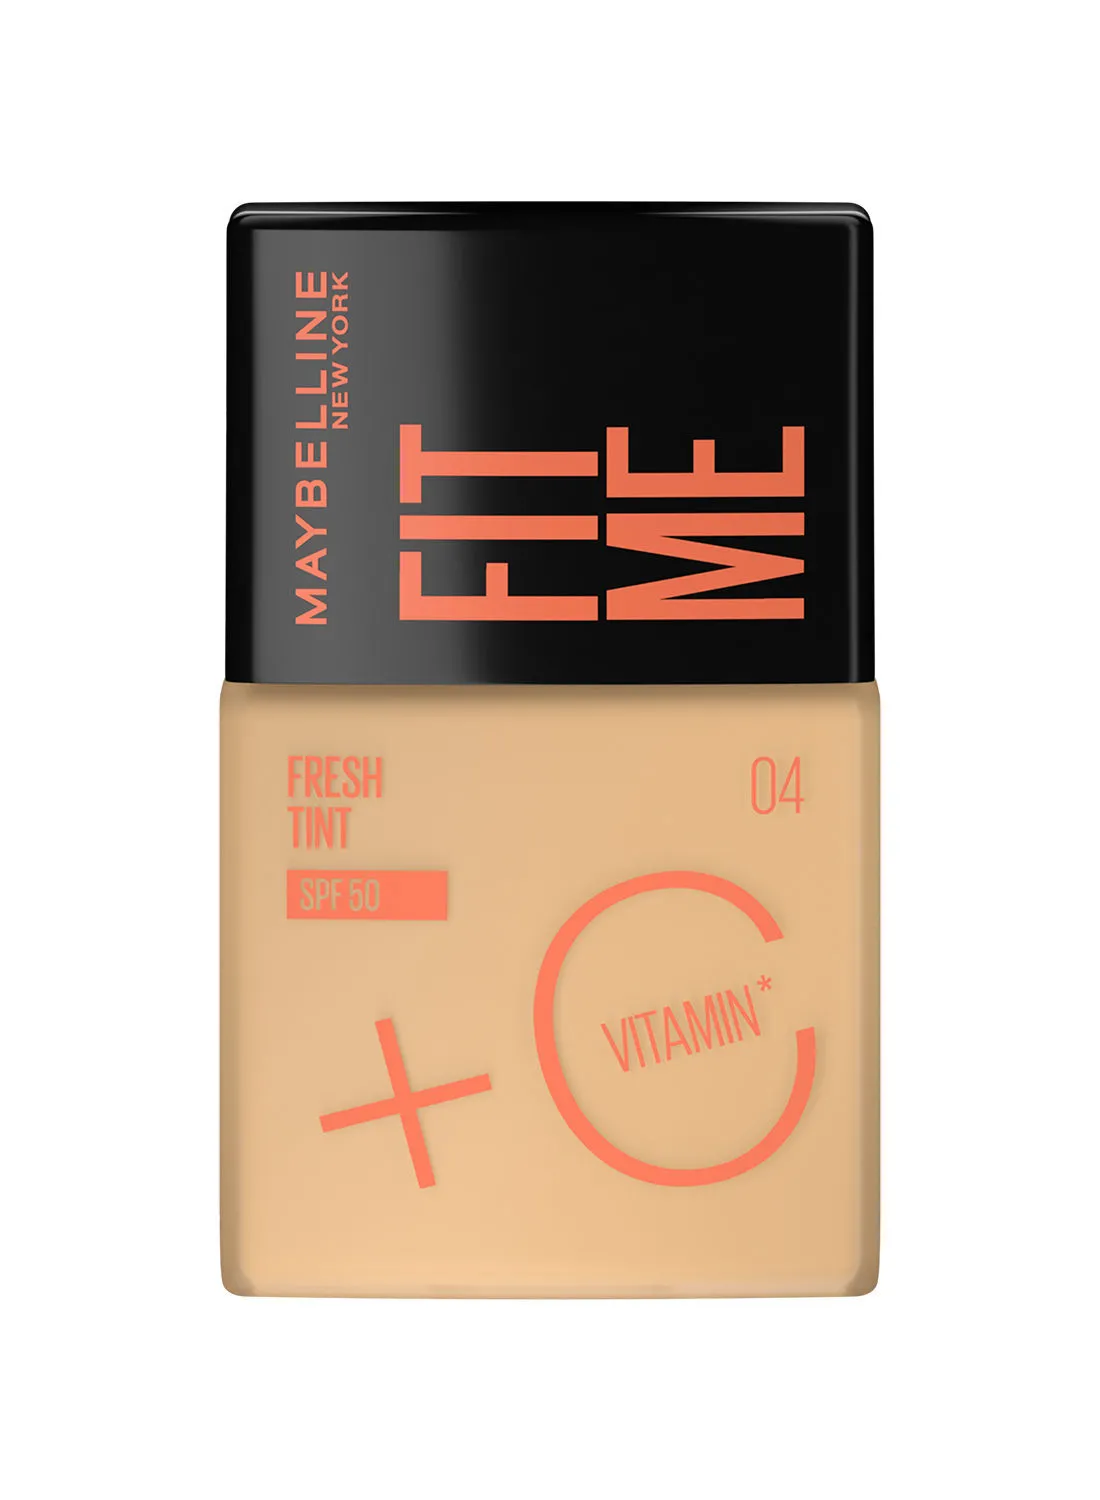 MAYBELLINE NEW YORK Maybelline New York, Fit Me Fresh Tint SPF 50 with Brightening Vitamin C, 04